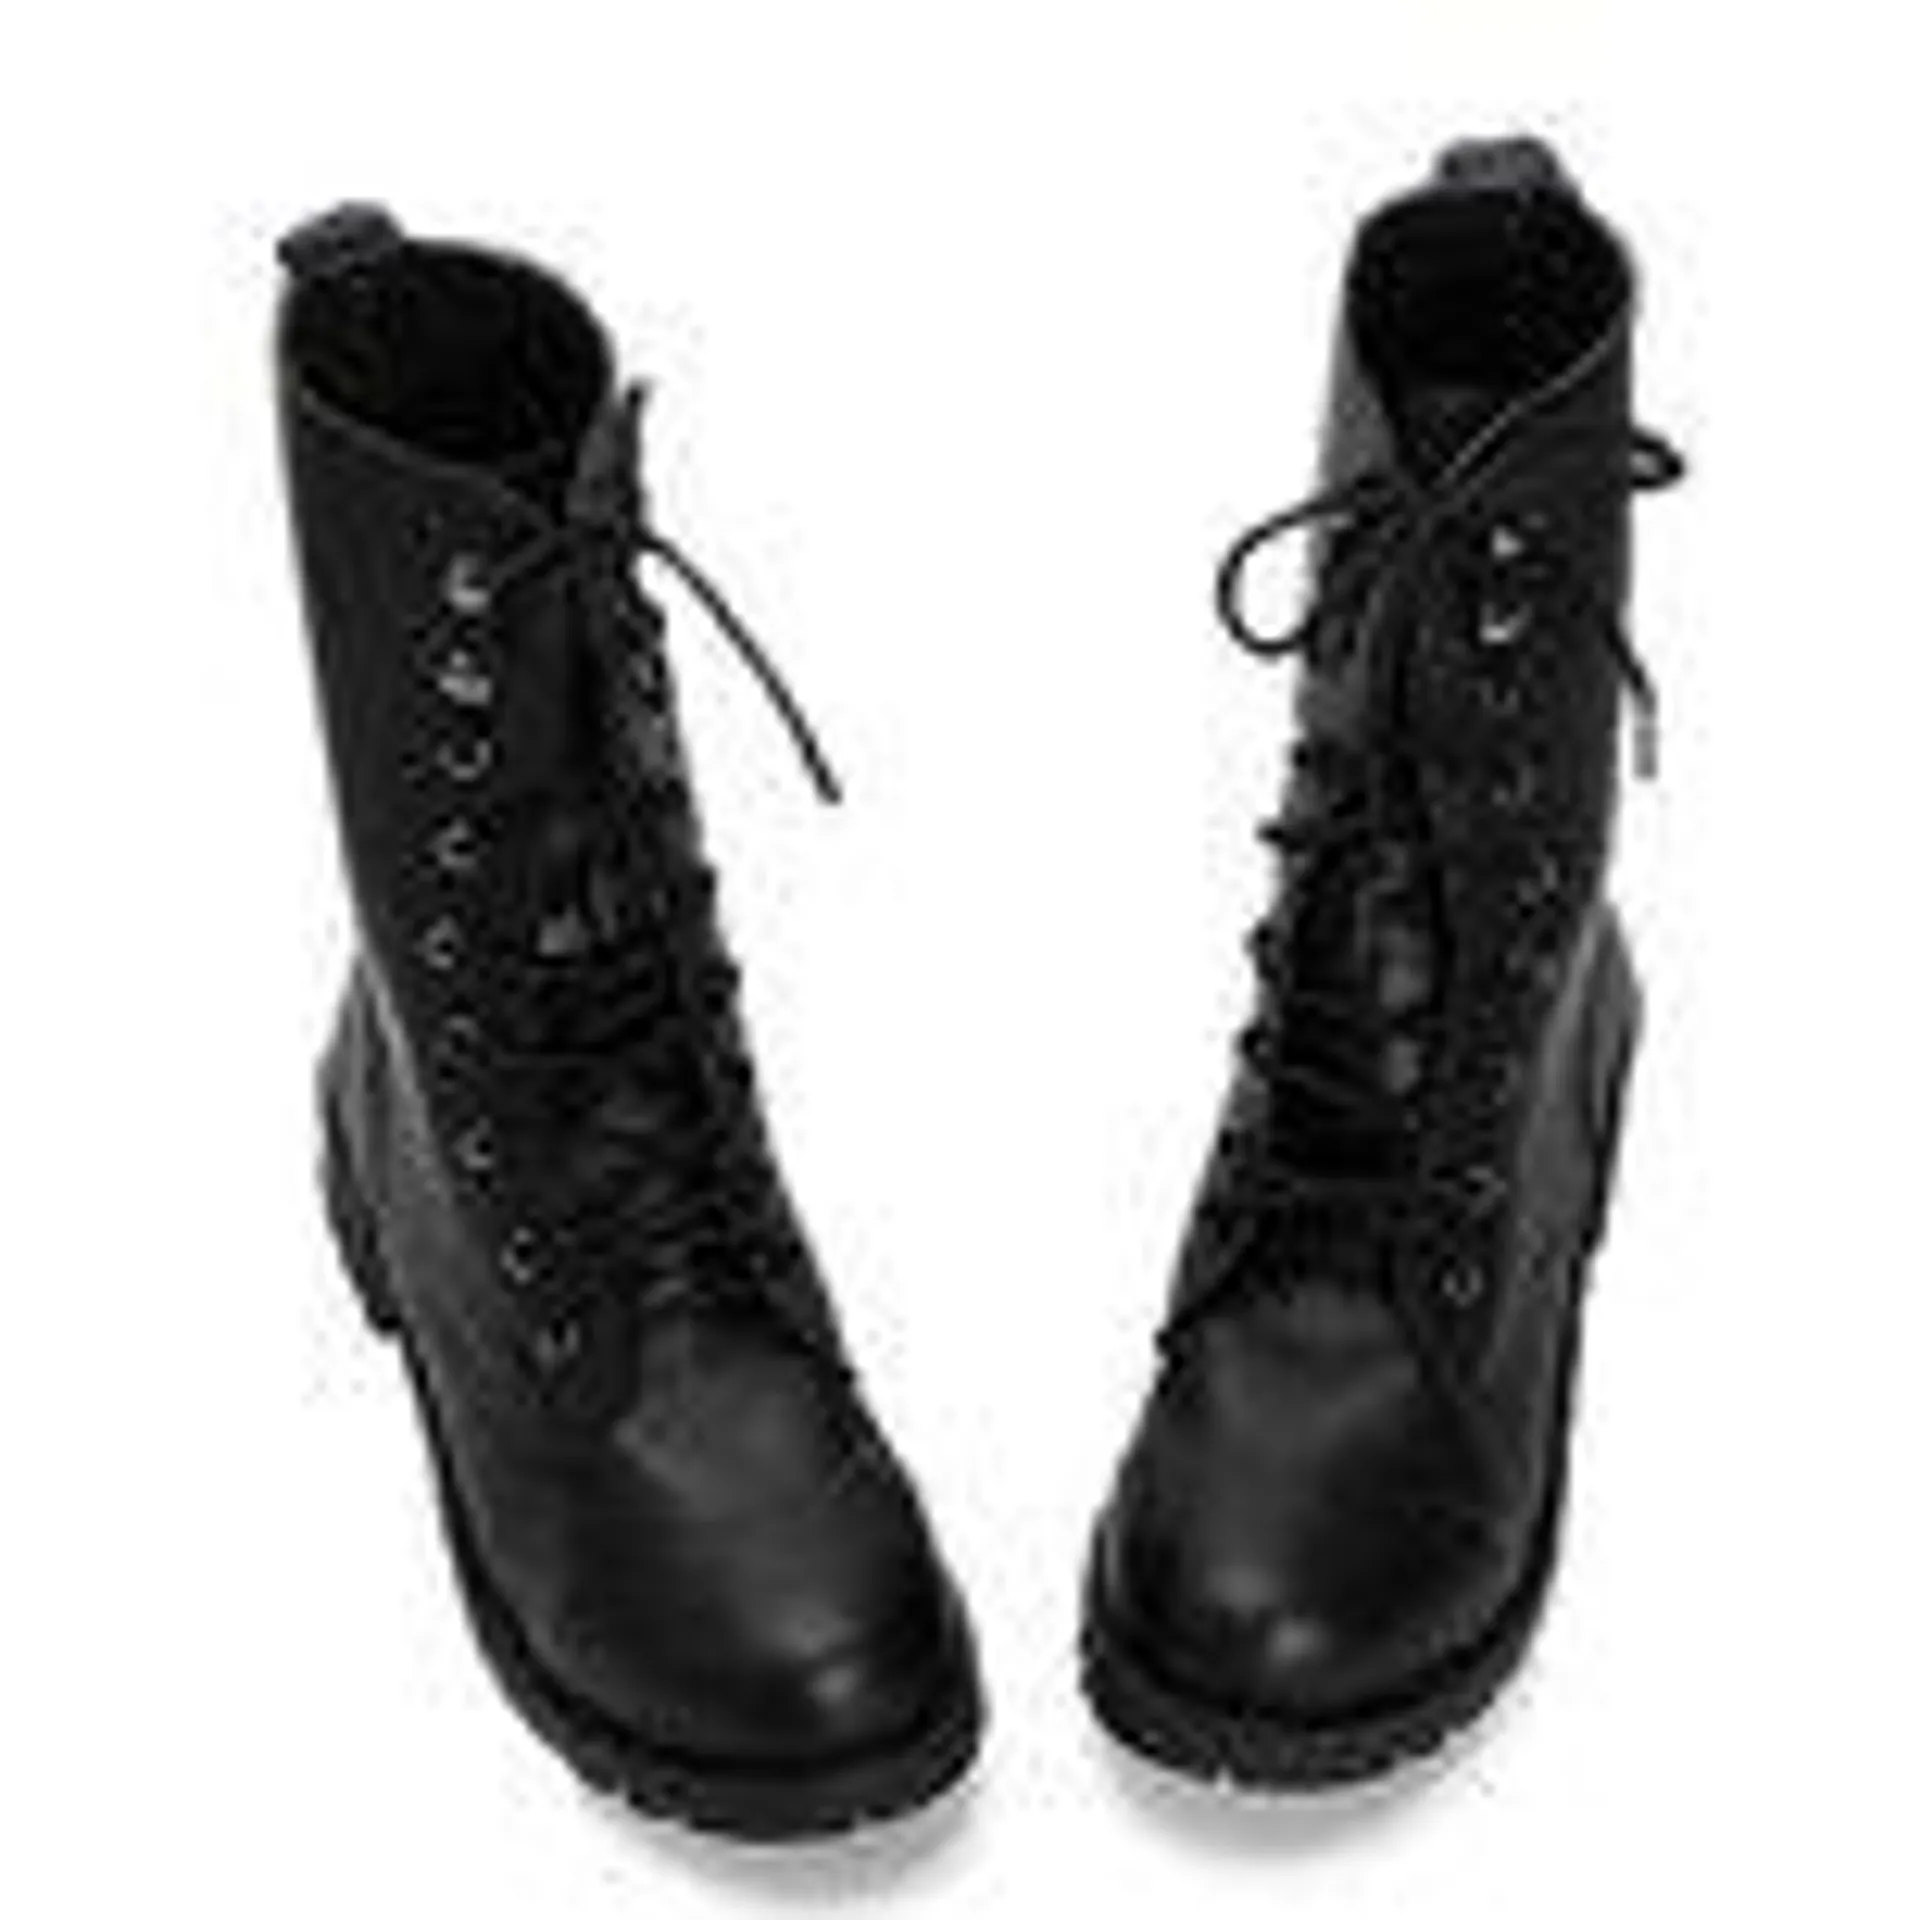 Newchic Retro Pu Black Knight Lace Up Flat Ankle Boots